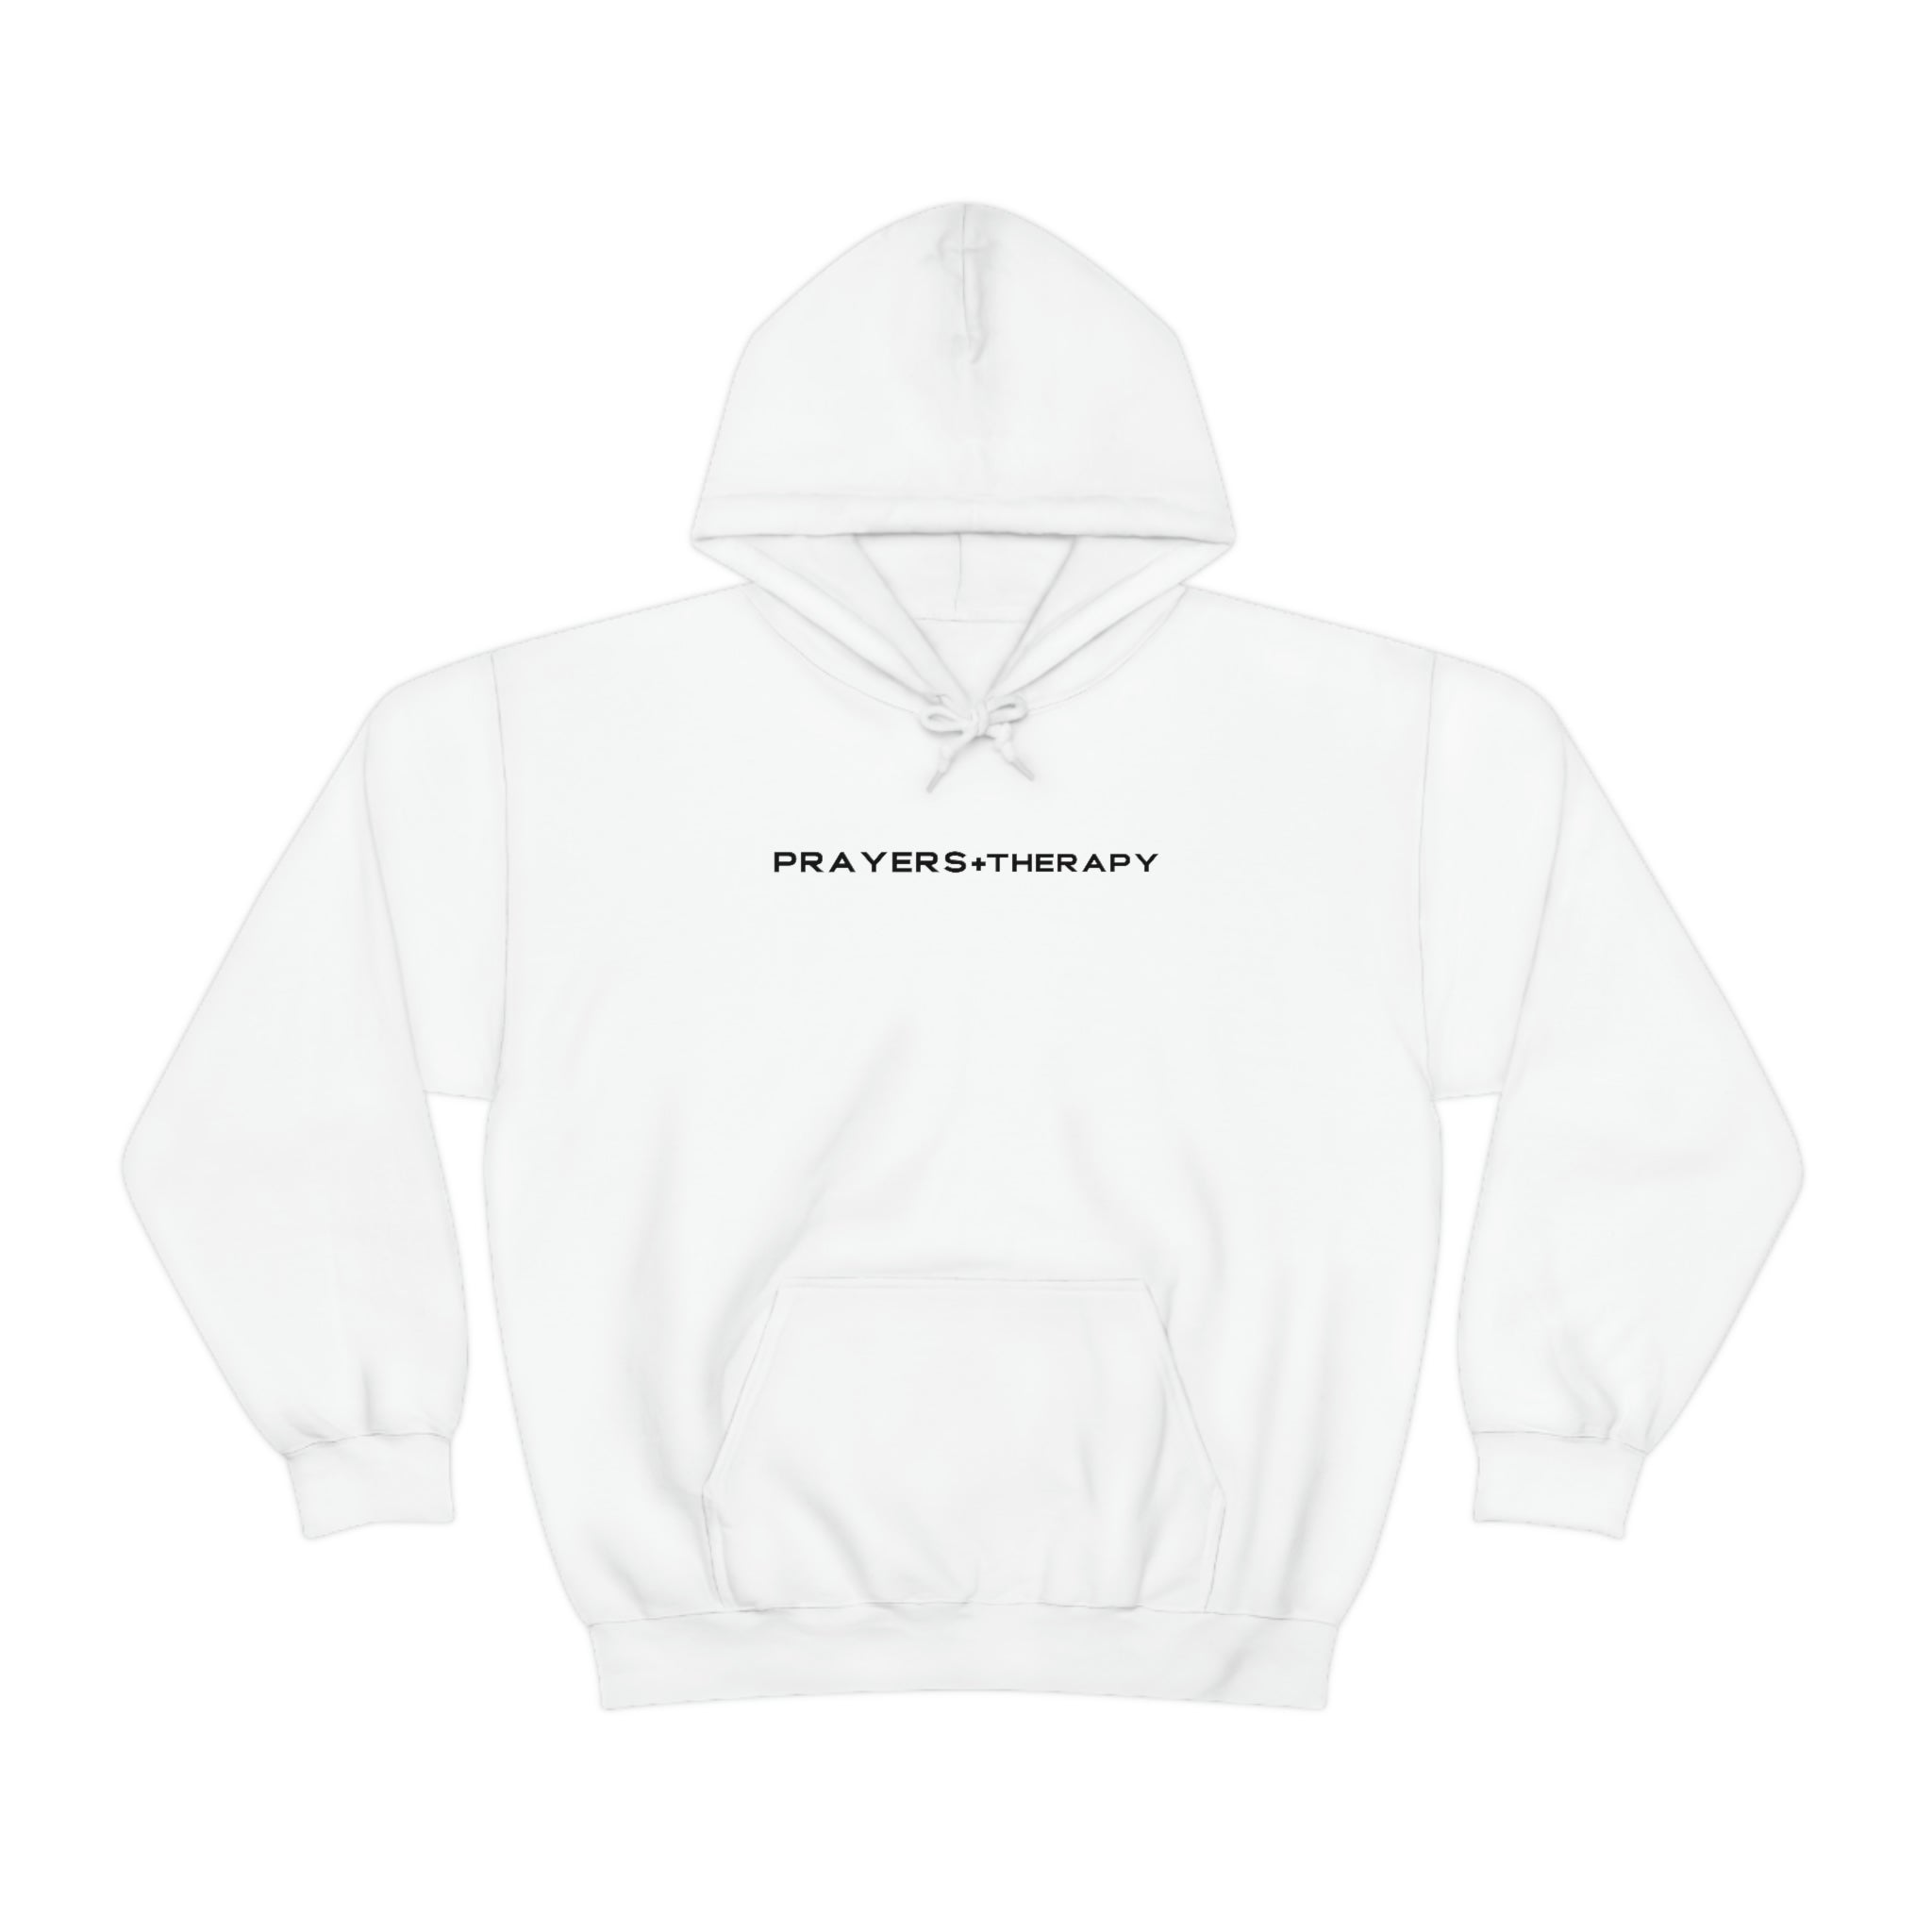 Prayers + Therapy Unisex Hoodie - Christian Mental Health Matters Collection